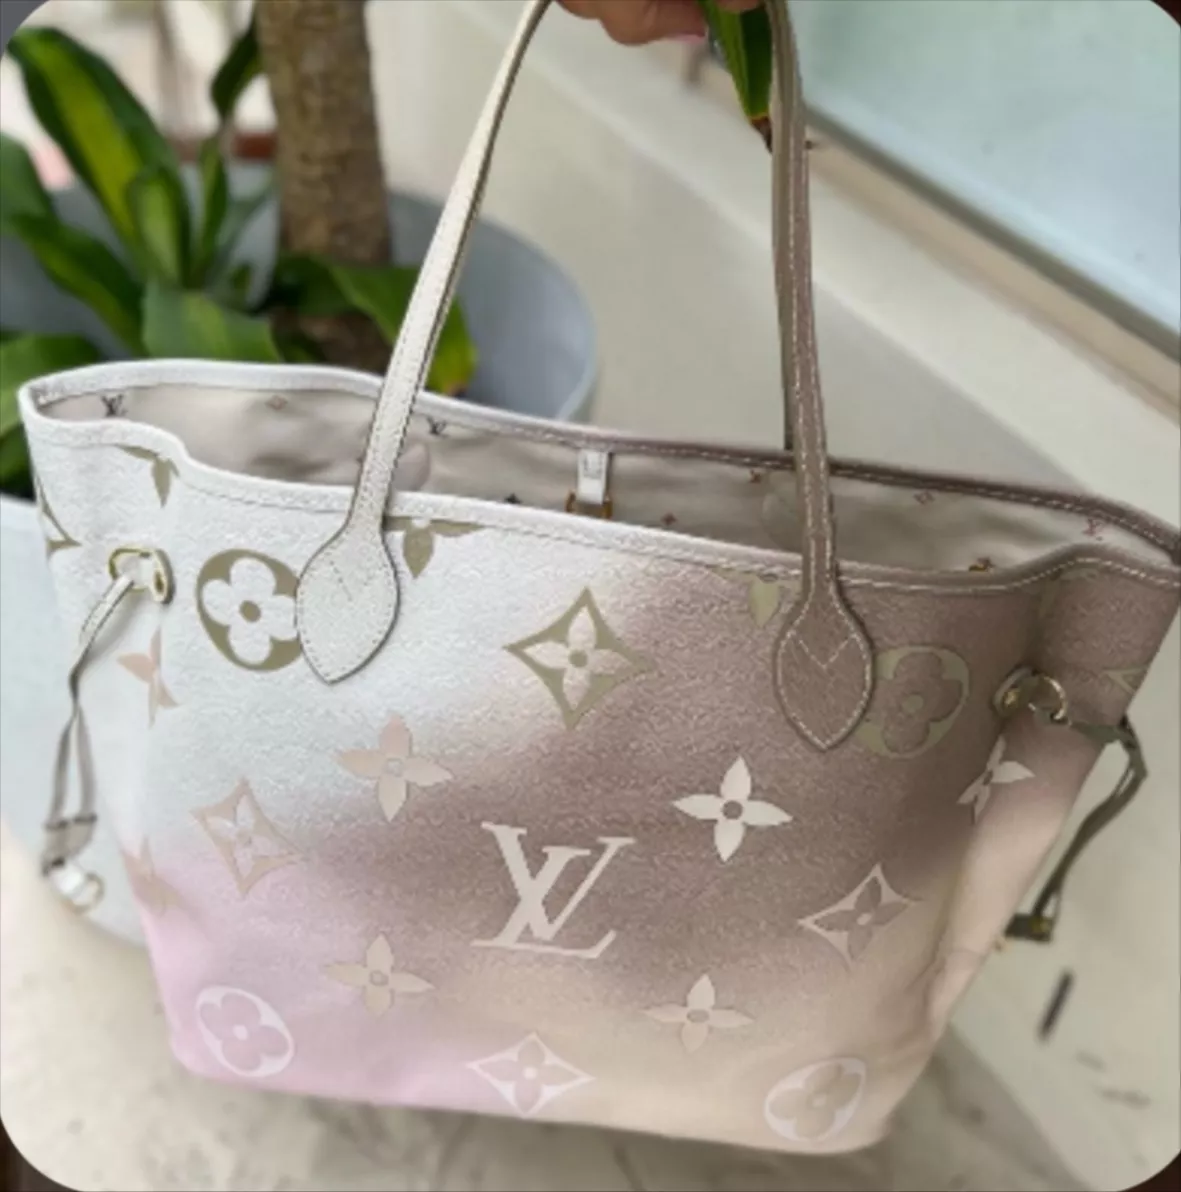 DHGate Unboxing & Review: Louis Vuitton Neverfull